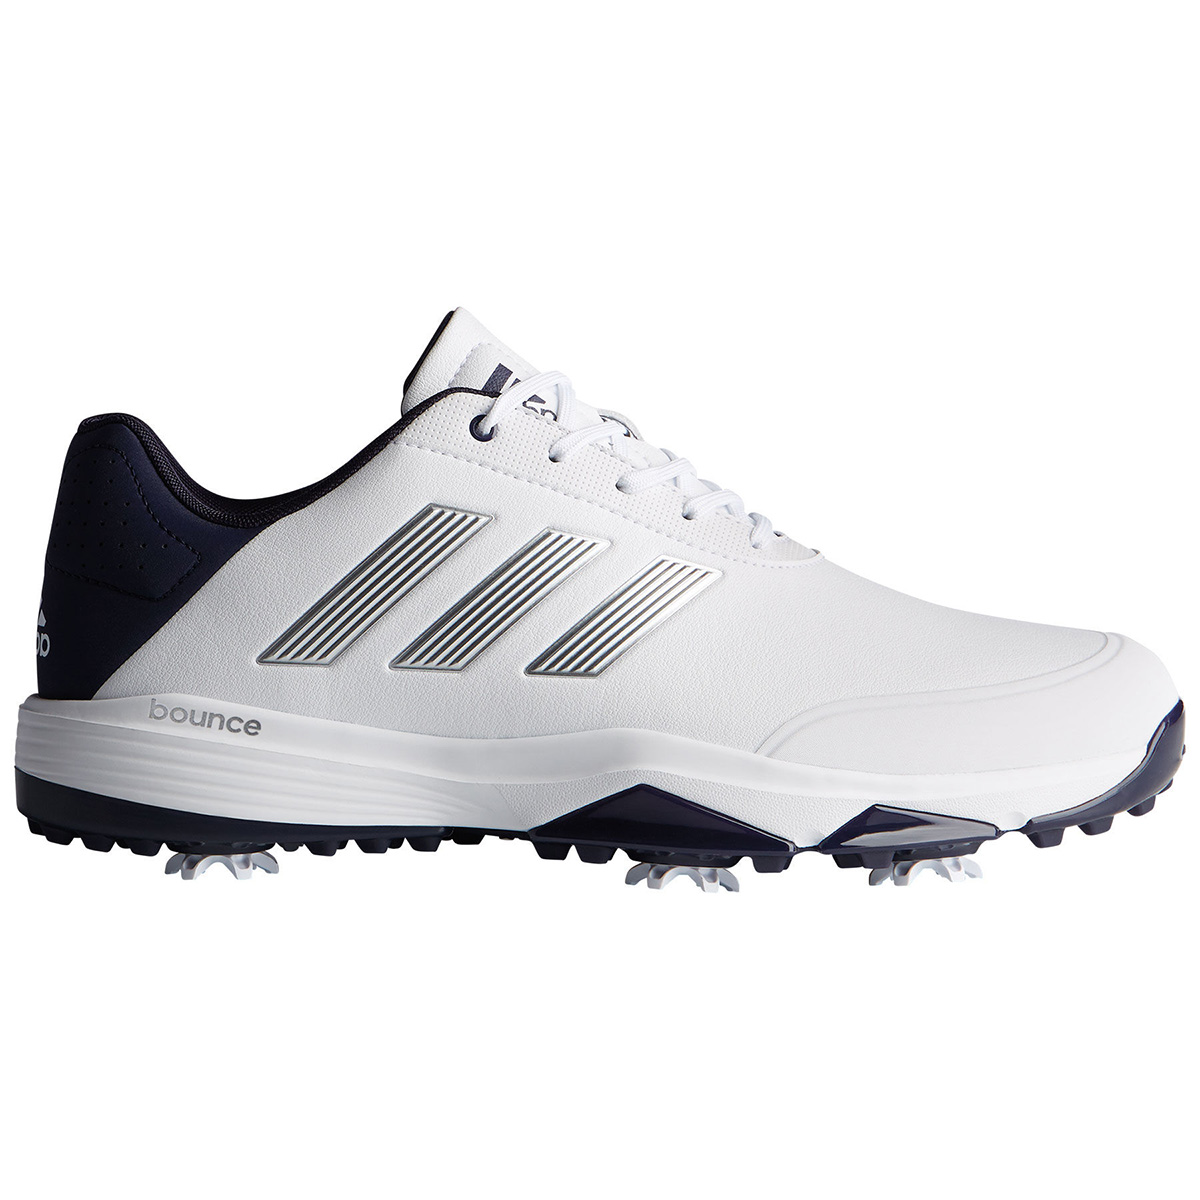 adidas Golf Adipower Bounce Shoes from american golf